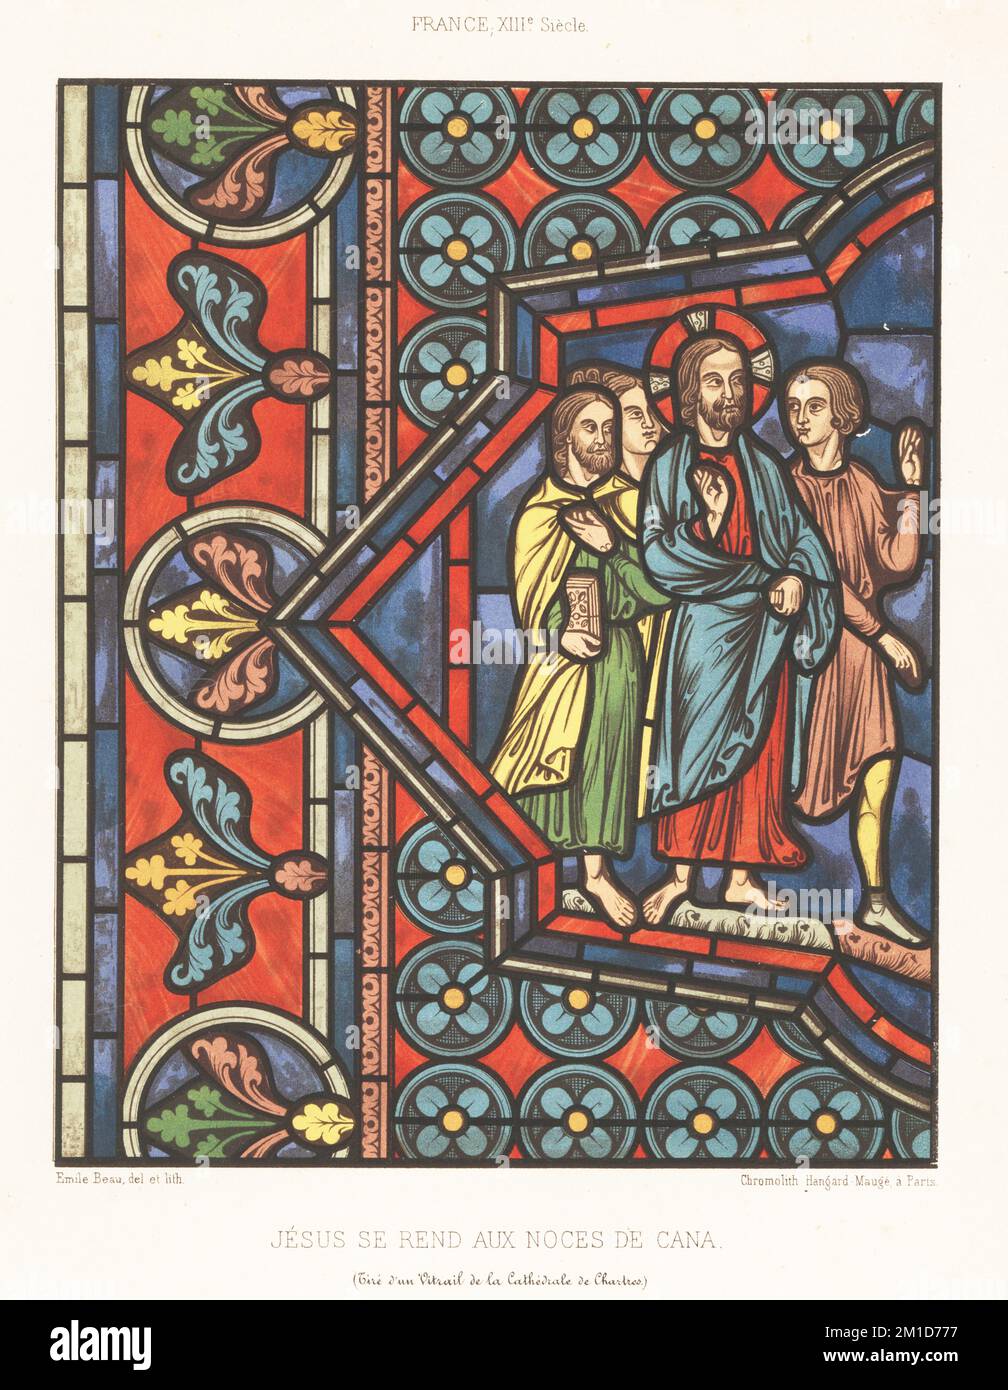 Jesus and disciples at the wedding in Cana. In the King Louis IX style with elegant draperies, large eyes, and calm attitude. From a stained-glass window in Chartres Cathedral, France, 13th century. Jesus se rend aux noces de Cana, France, XIIIe siecle. Chromolithograph by Emile Beau from Charles Louandre’s Les Arts Somptuaires, The Sumptuary Arts, Hangard-Mauge, Paris, 1858. Stock Photo